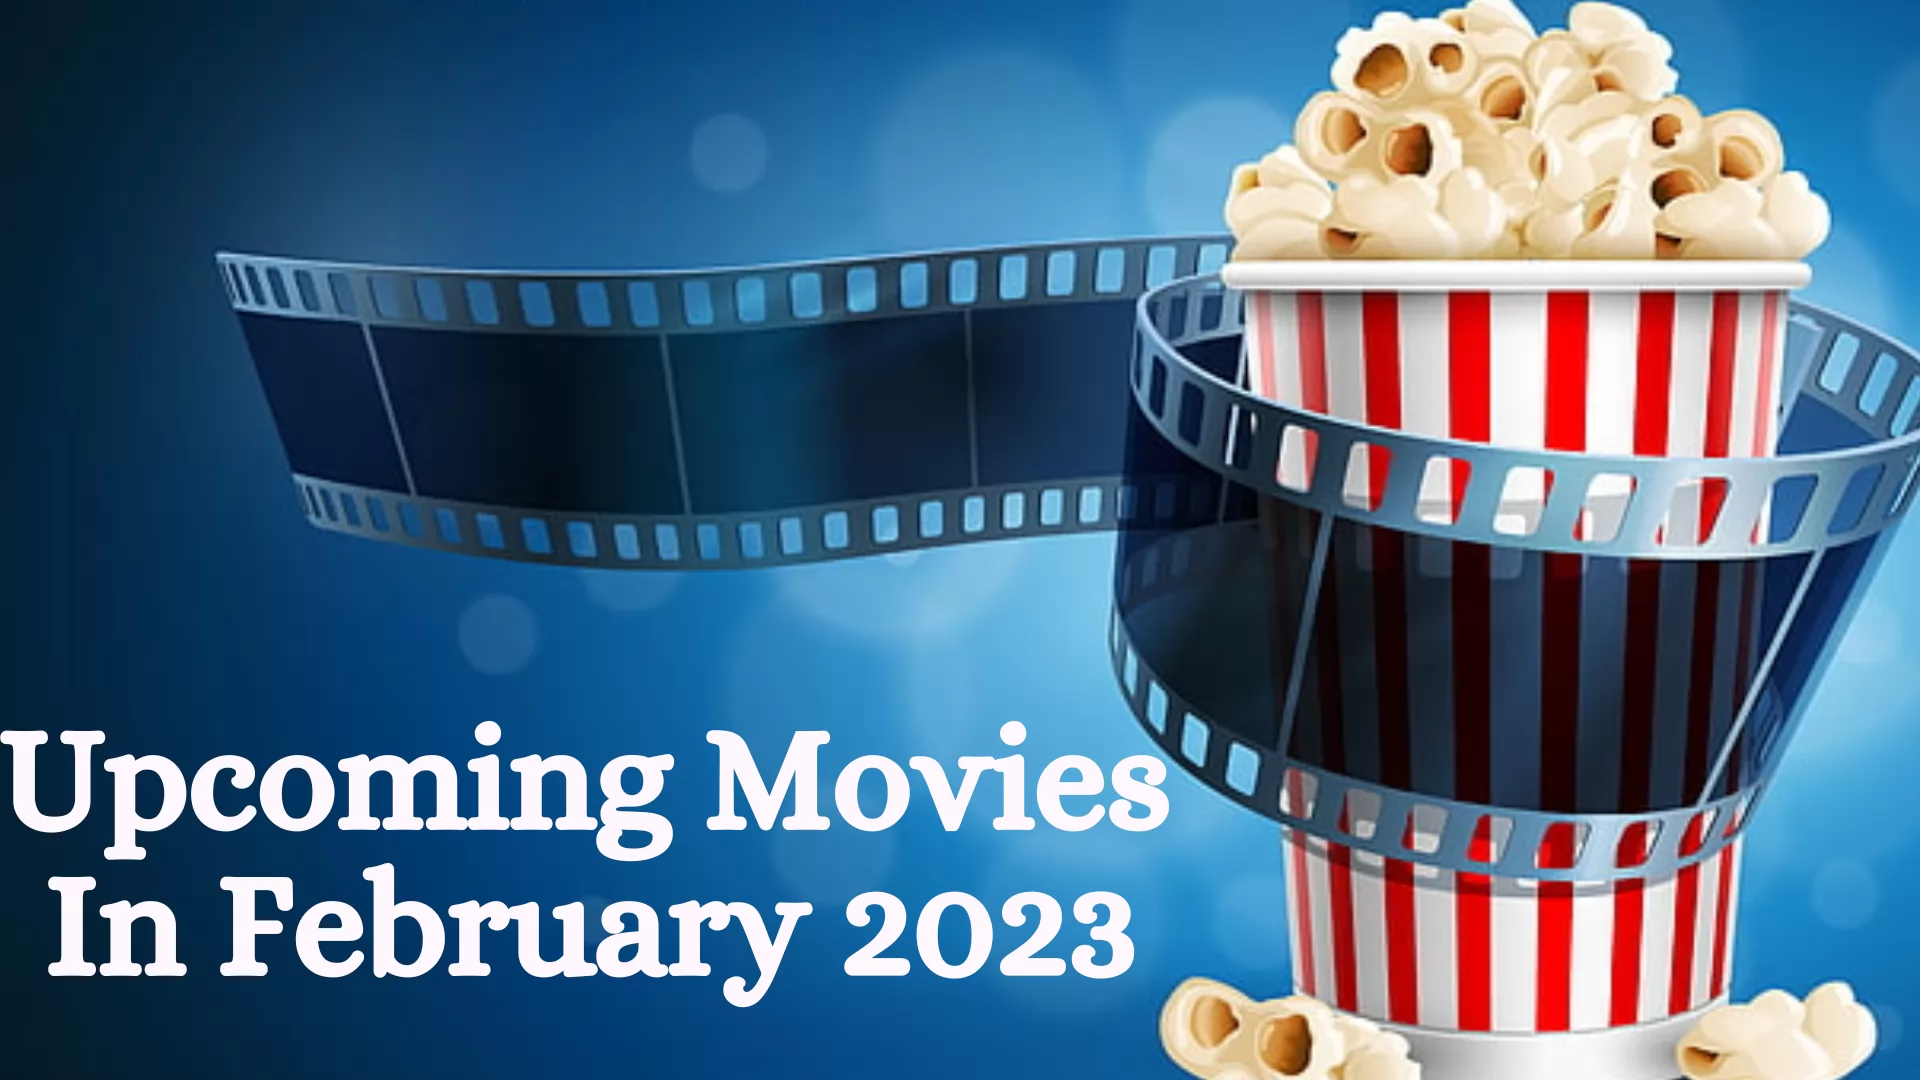 Upcoming Movies In February 2023